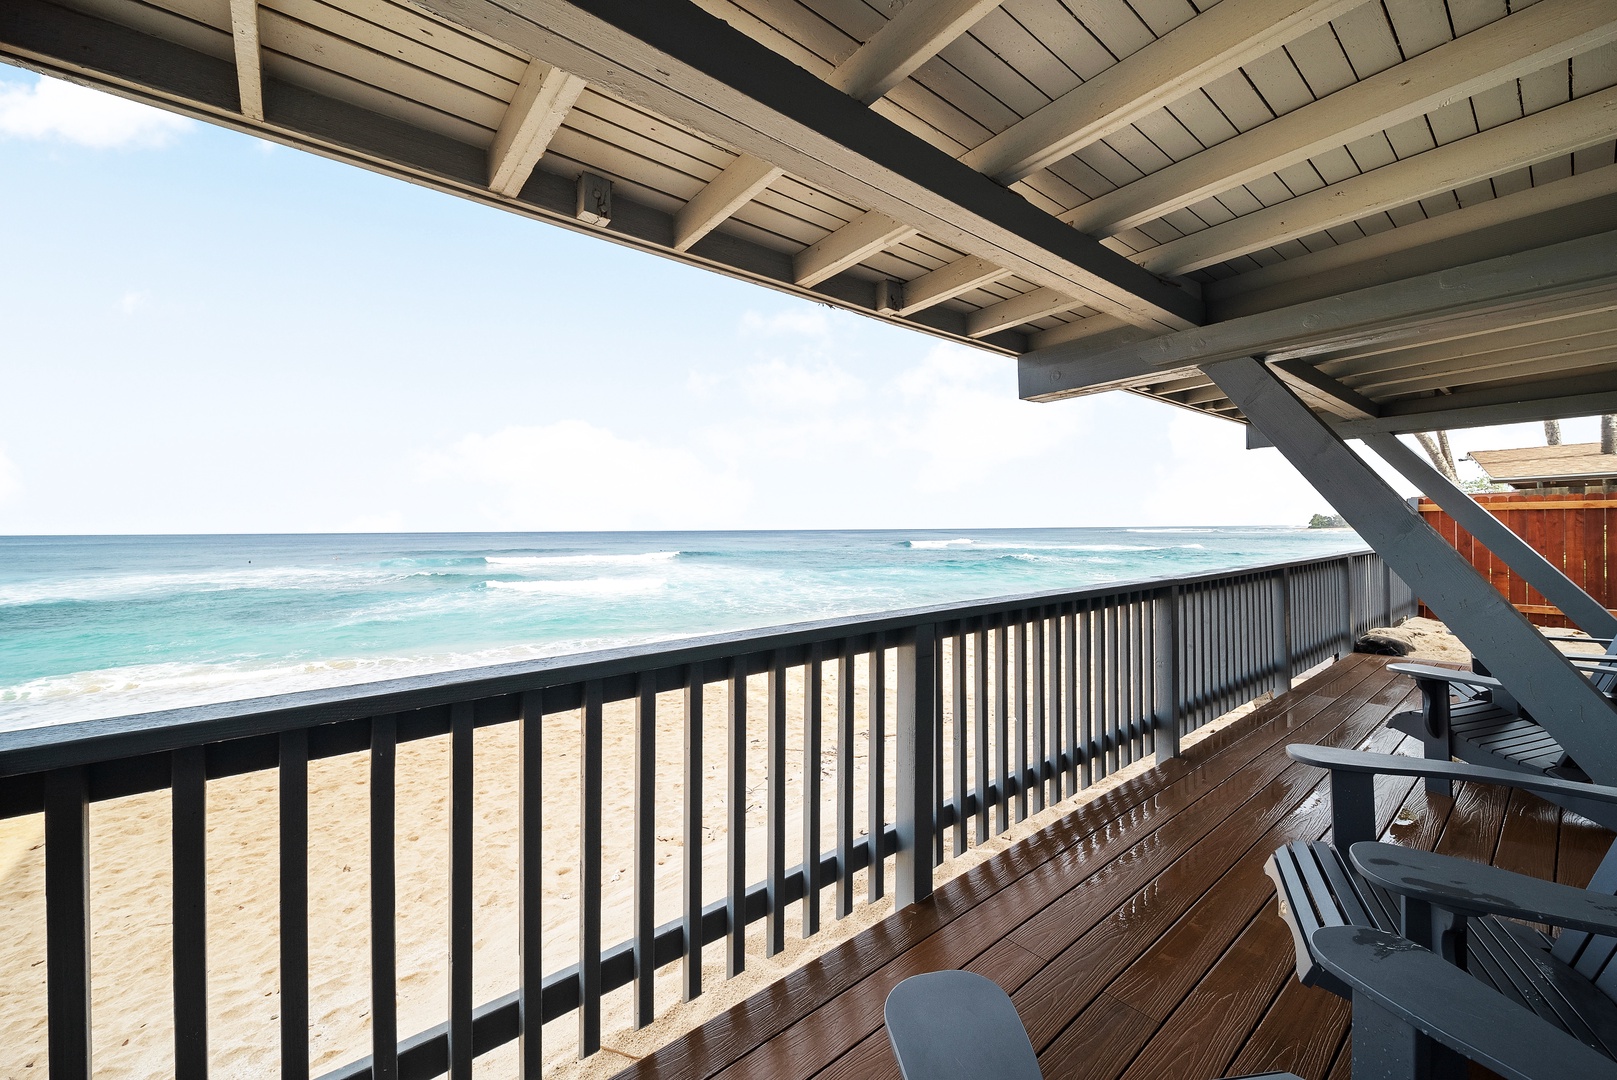 Haleiwa Vacation Rentals, Surfer's Paradise - The views off the lower-level deck will leave you speachless